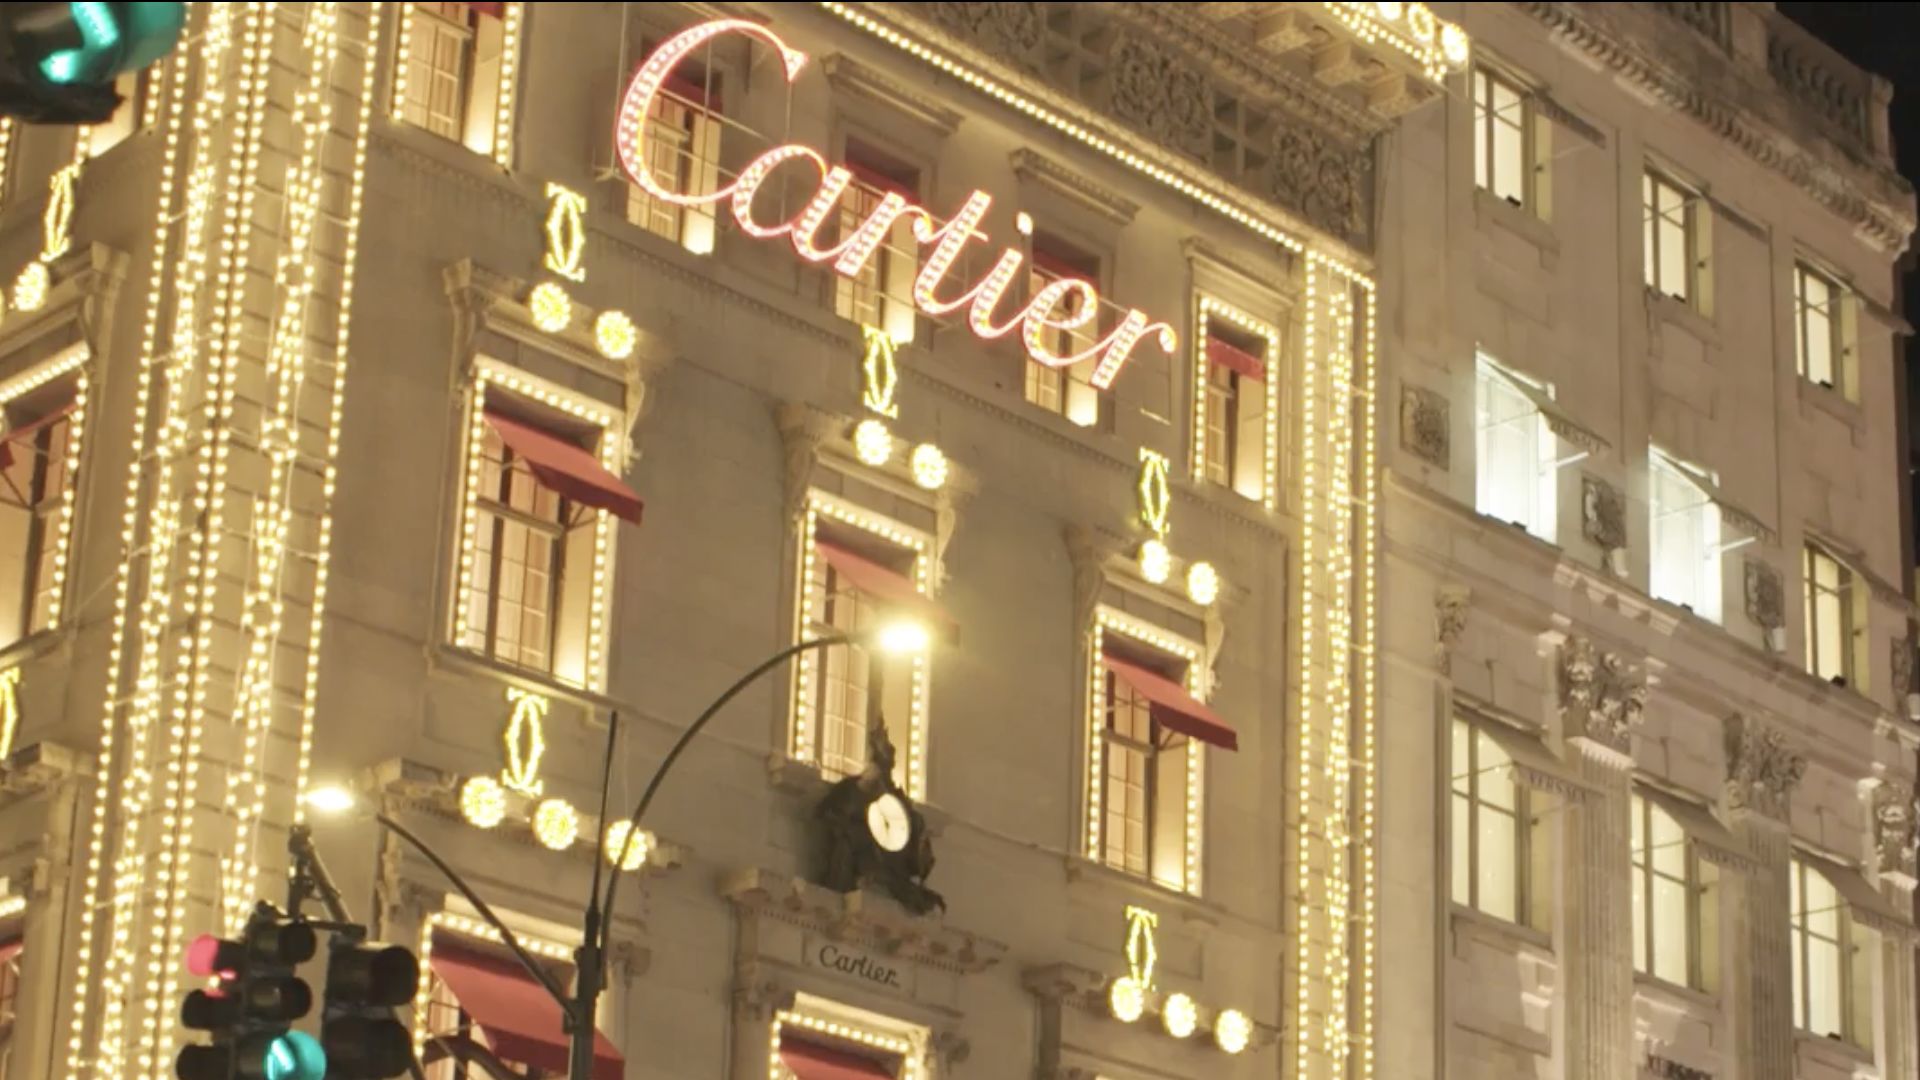 Explore Cartier's Newly Redesigned Maisons in New York and Paris